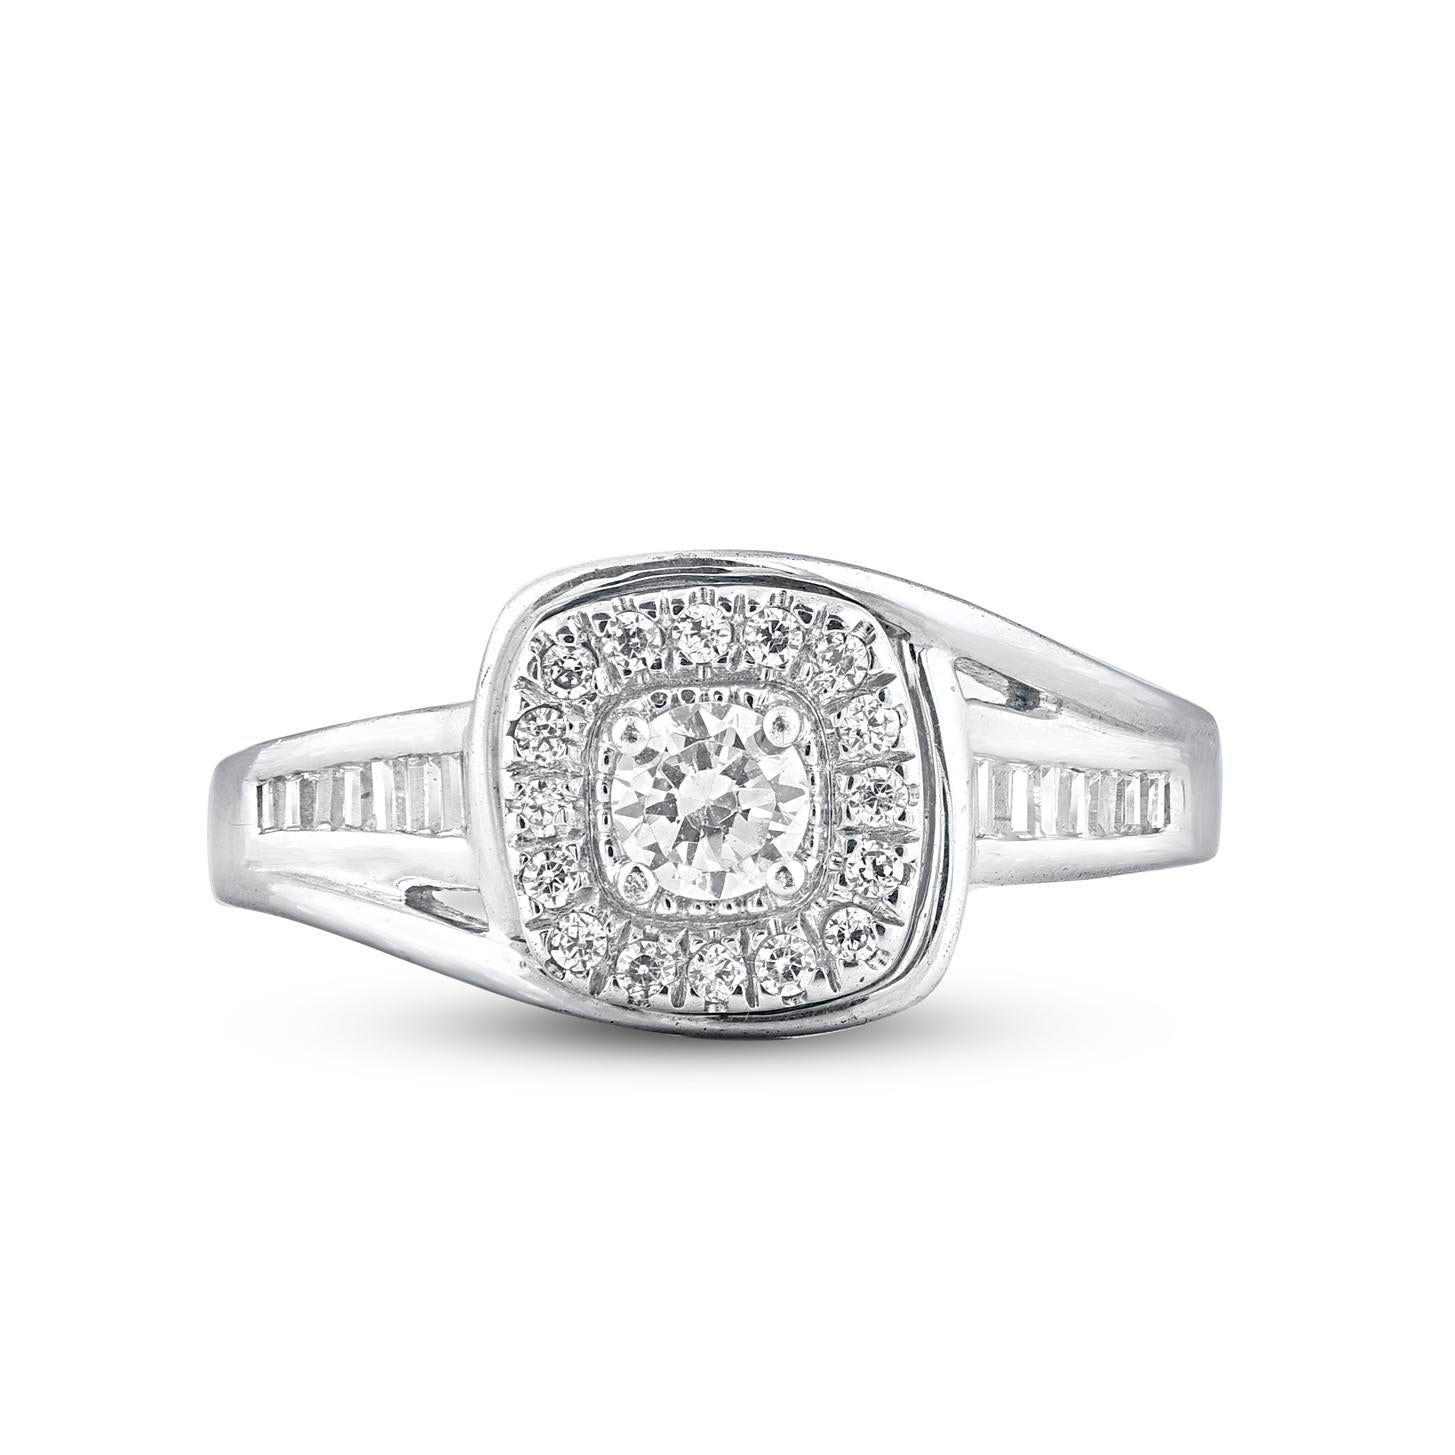 Win her heart with this classic and elegant diamond wedding ring. These diamond ring are studded with 31 baguette cut and brilliant cut diamonds in pave, prong & channel setting and crafted in 14kt white gold. The white diamonds are graded as H-I